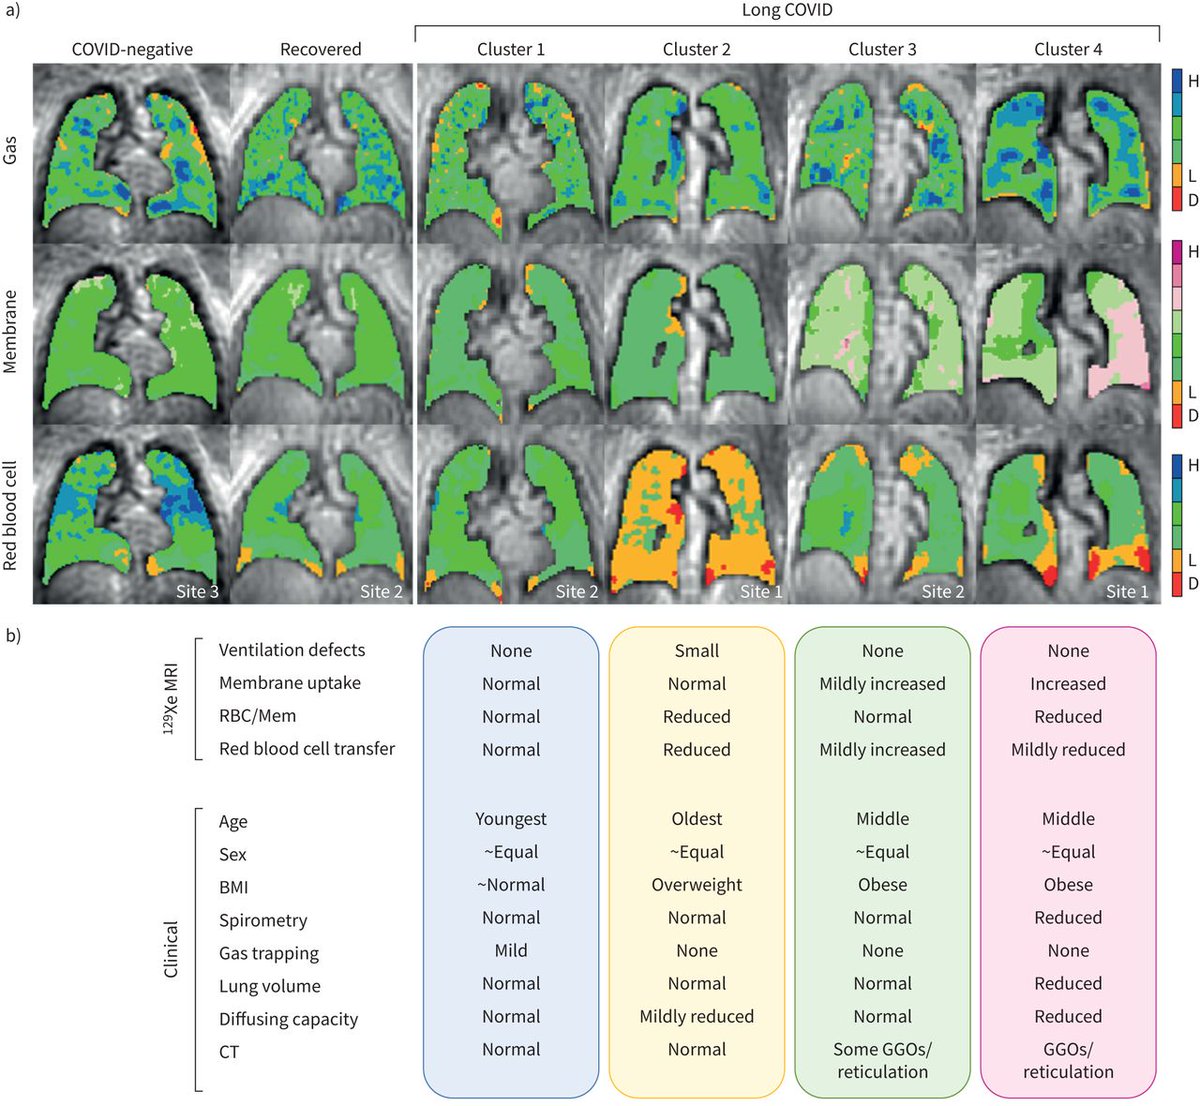 Cluster analysis of 129Xe MRI metrics identifies 4 phenotypes of long COVID with distinct functional MRI and clinical characteristics. MRI-based clusters can be used to dissect long COVID heterogeneity, enabling personalised clinical care and treatment. bit.ly/42uia1J